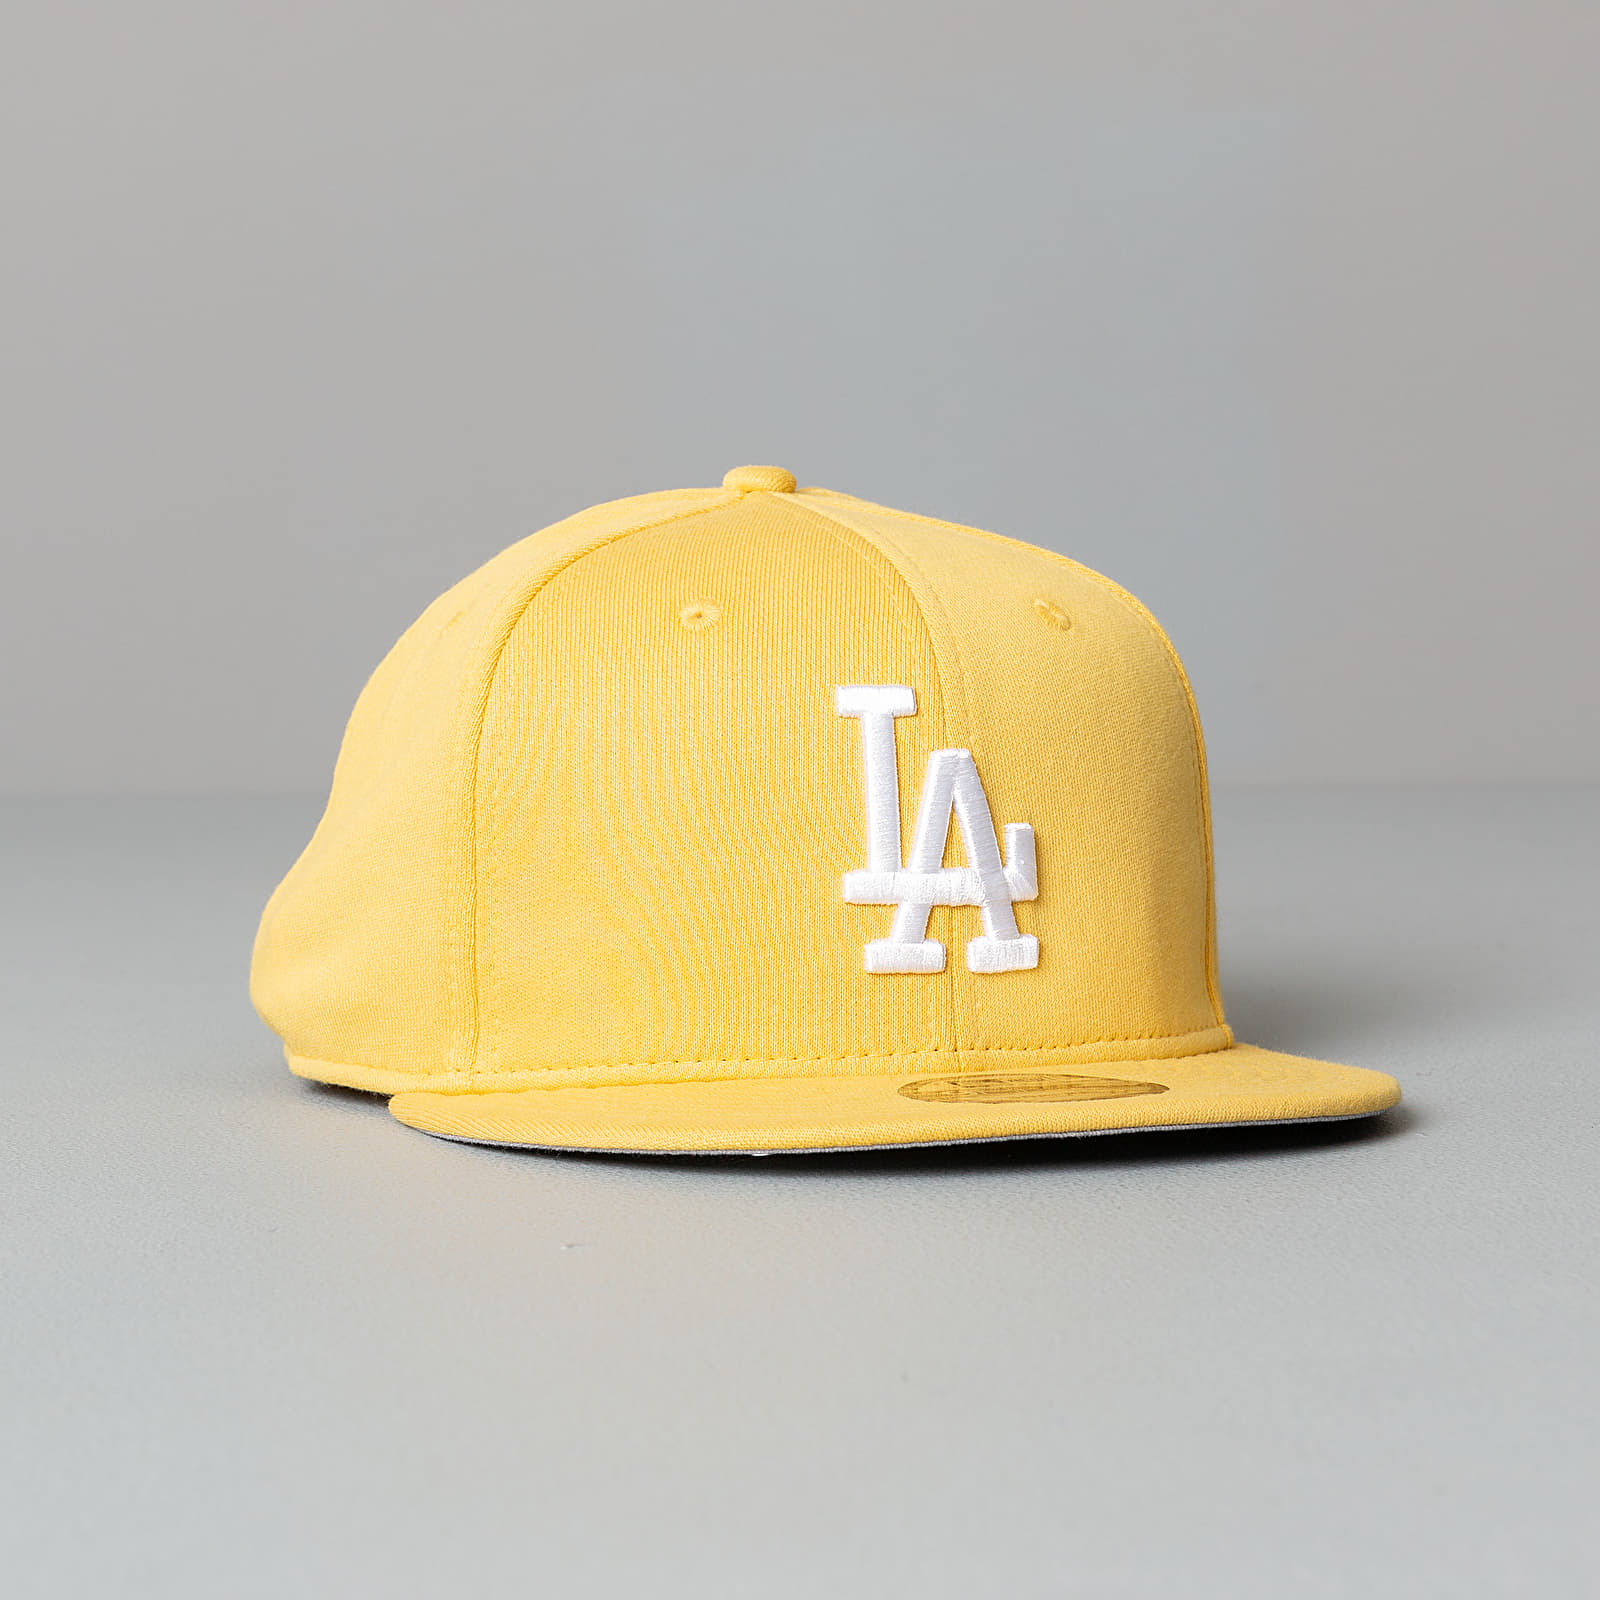 Caps New Era 9Fifty MLB Jersey Pack Los Angeles Dodgers Cap Yellow